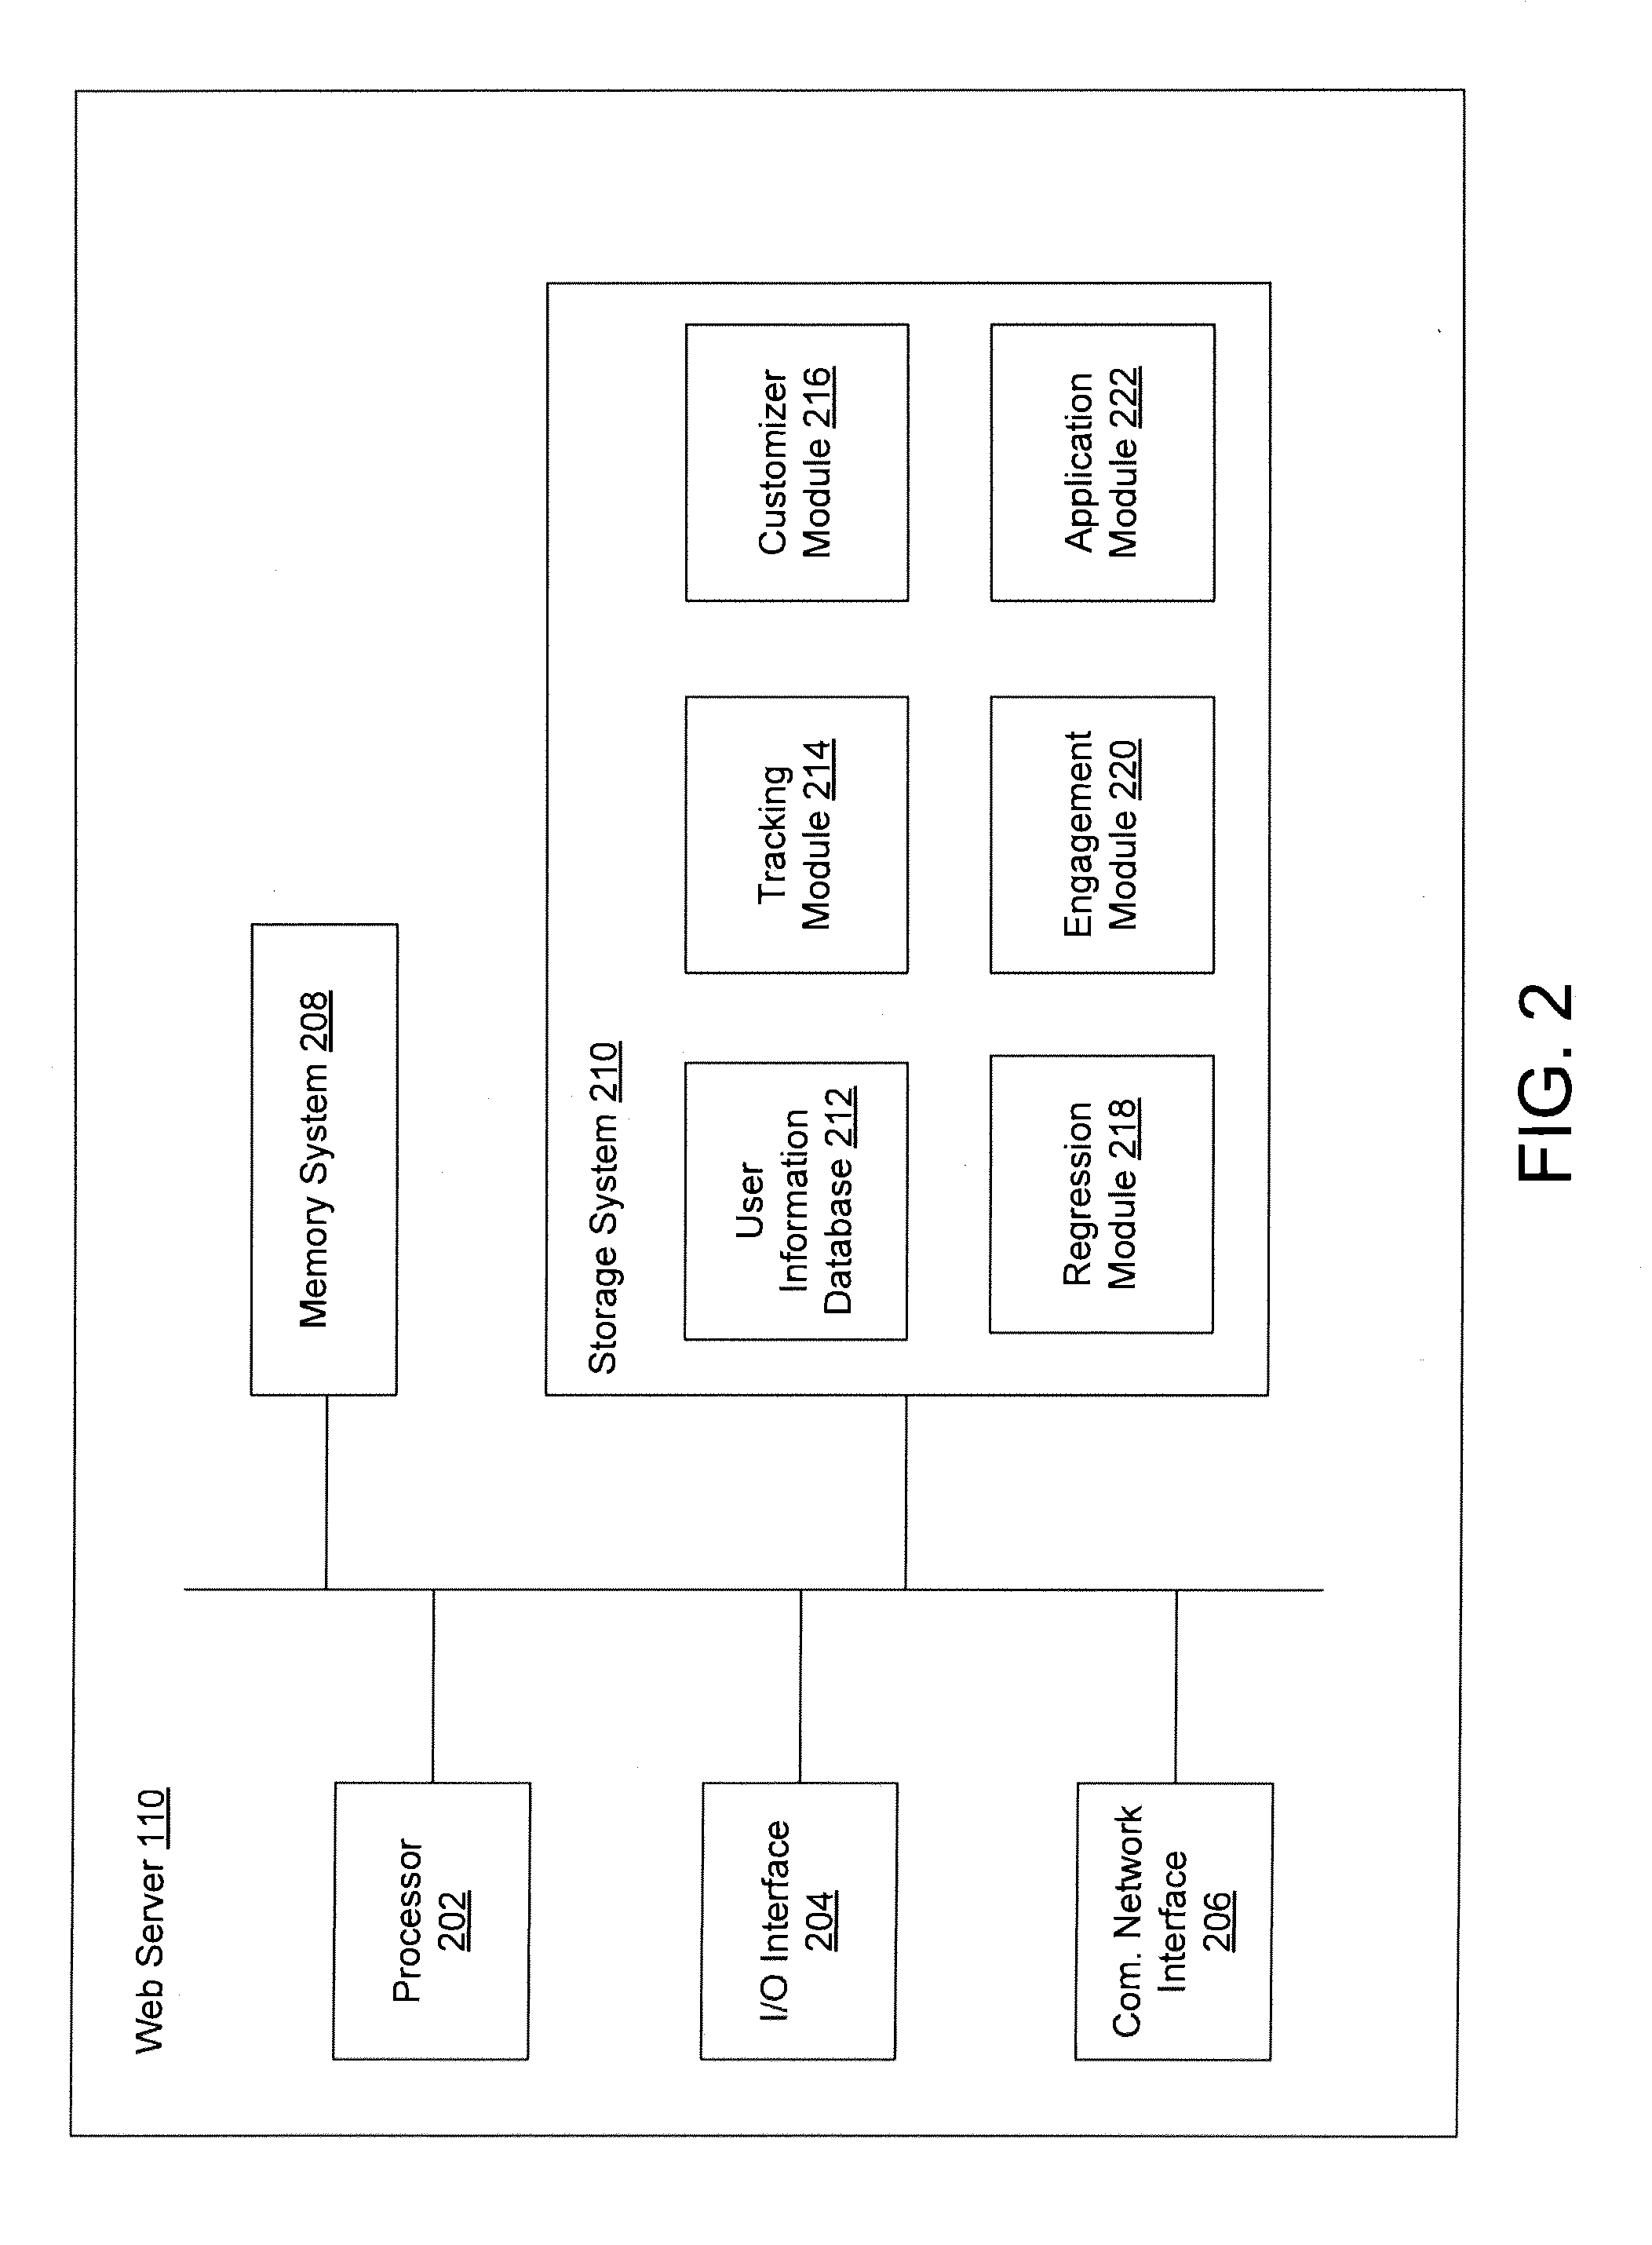 Systems and Methods for Measurement of Engagement